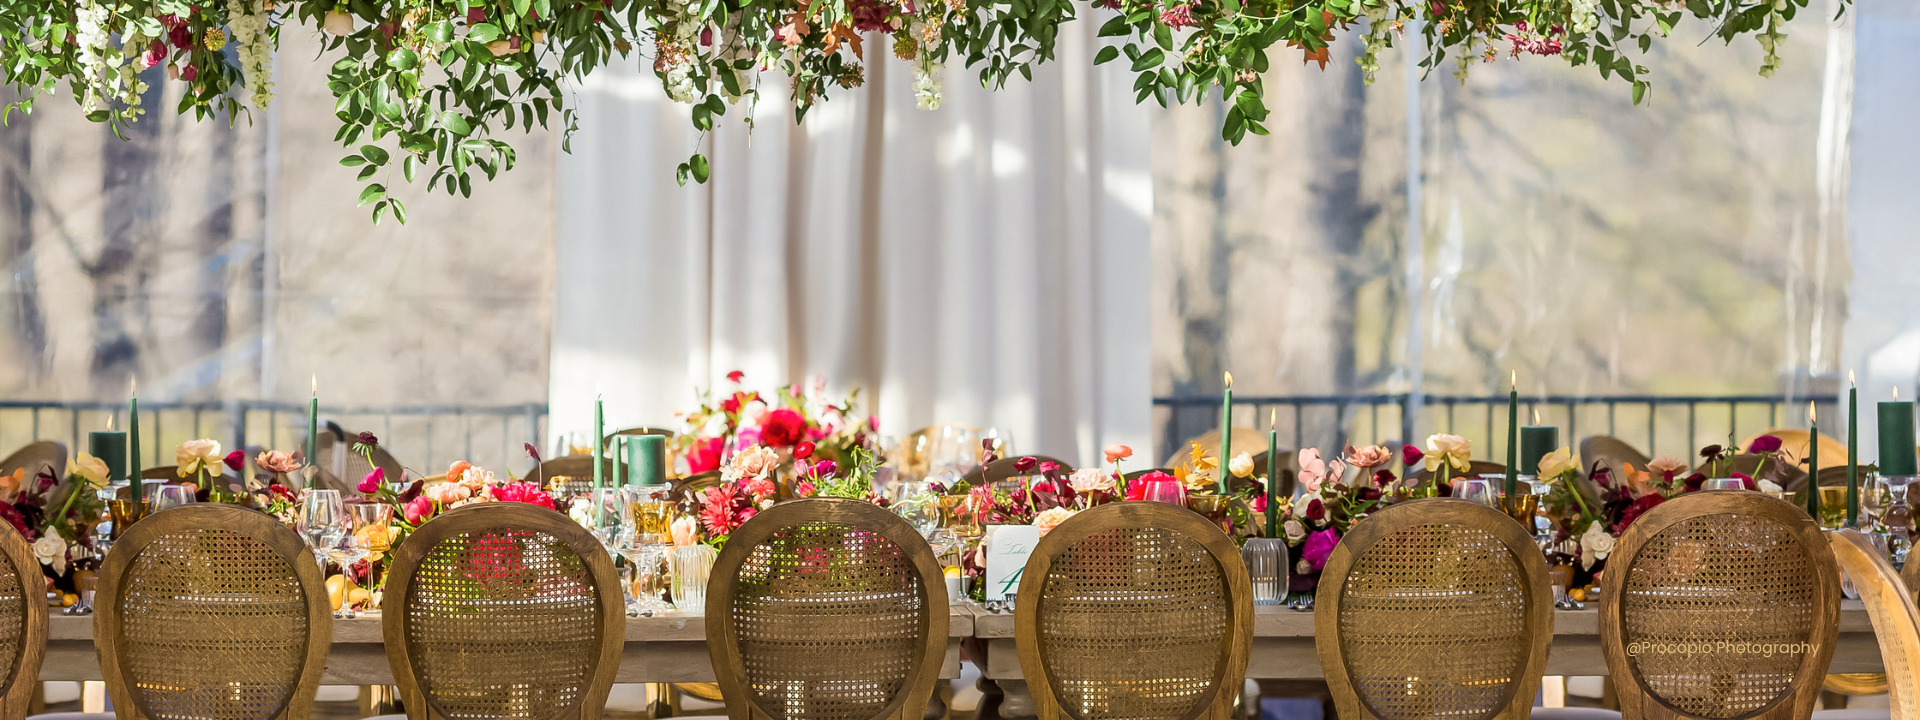 Fall wedding table photo with hunter green tapers and pillars